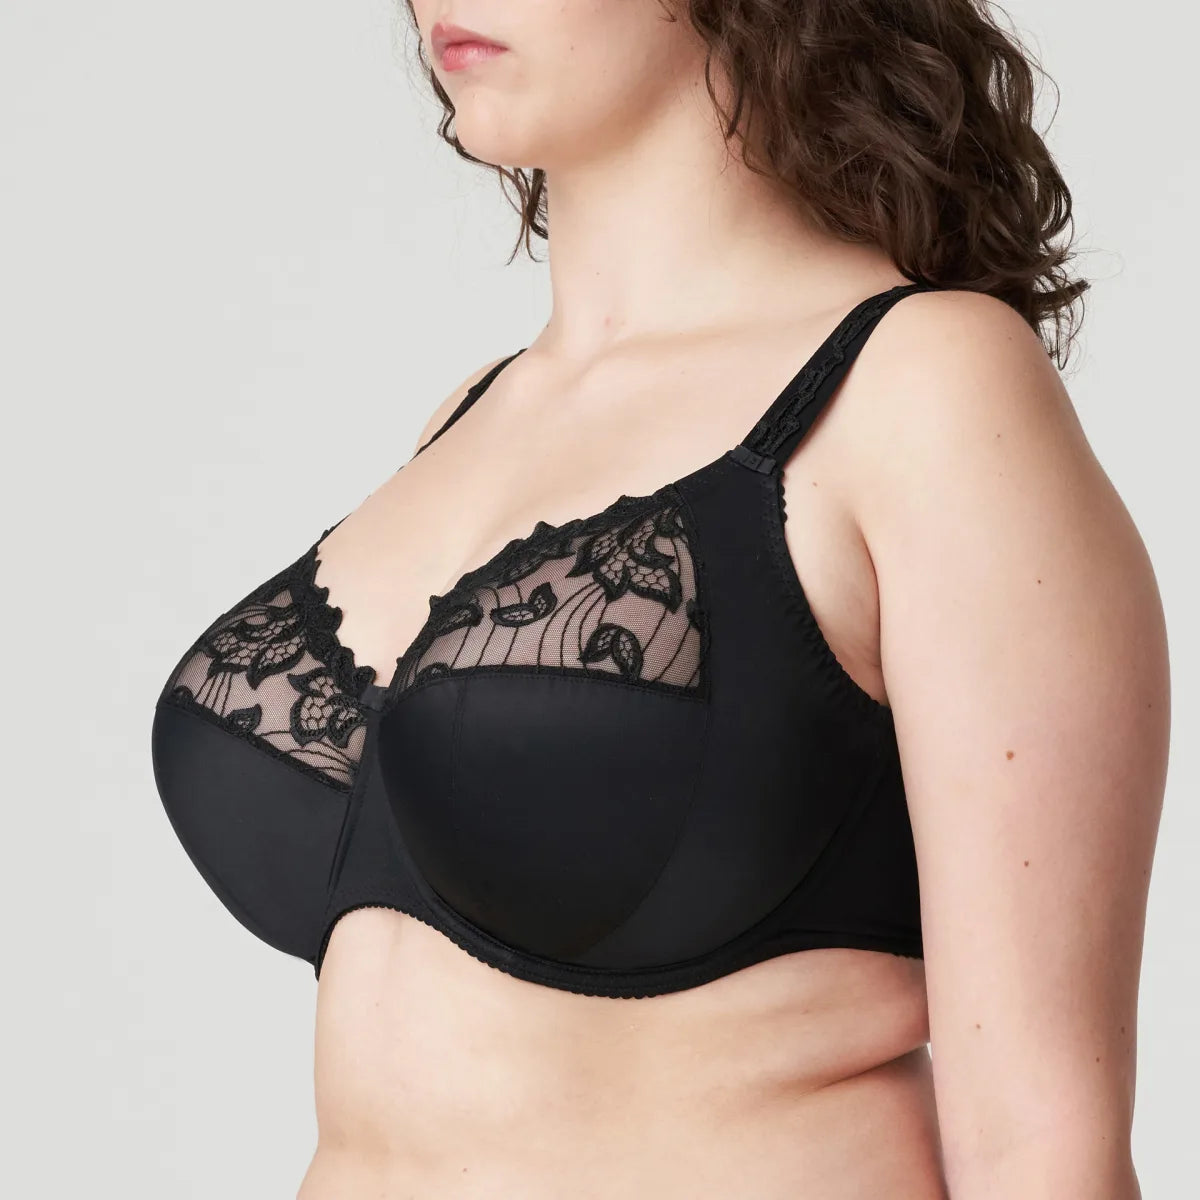 Prima Donna Deauville Full Cup Bra (Cup Sizes I,J)